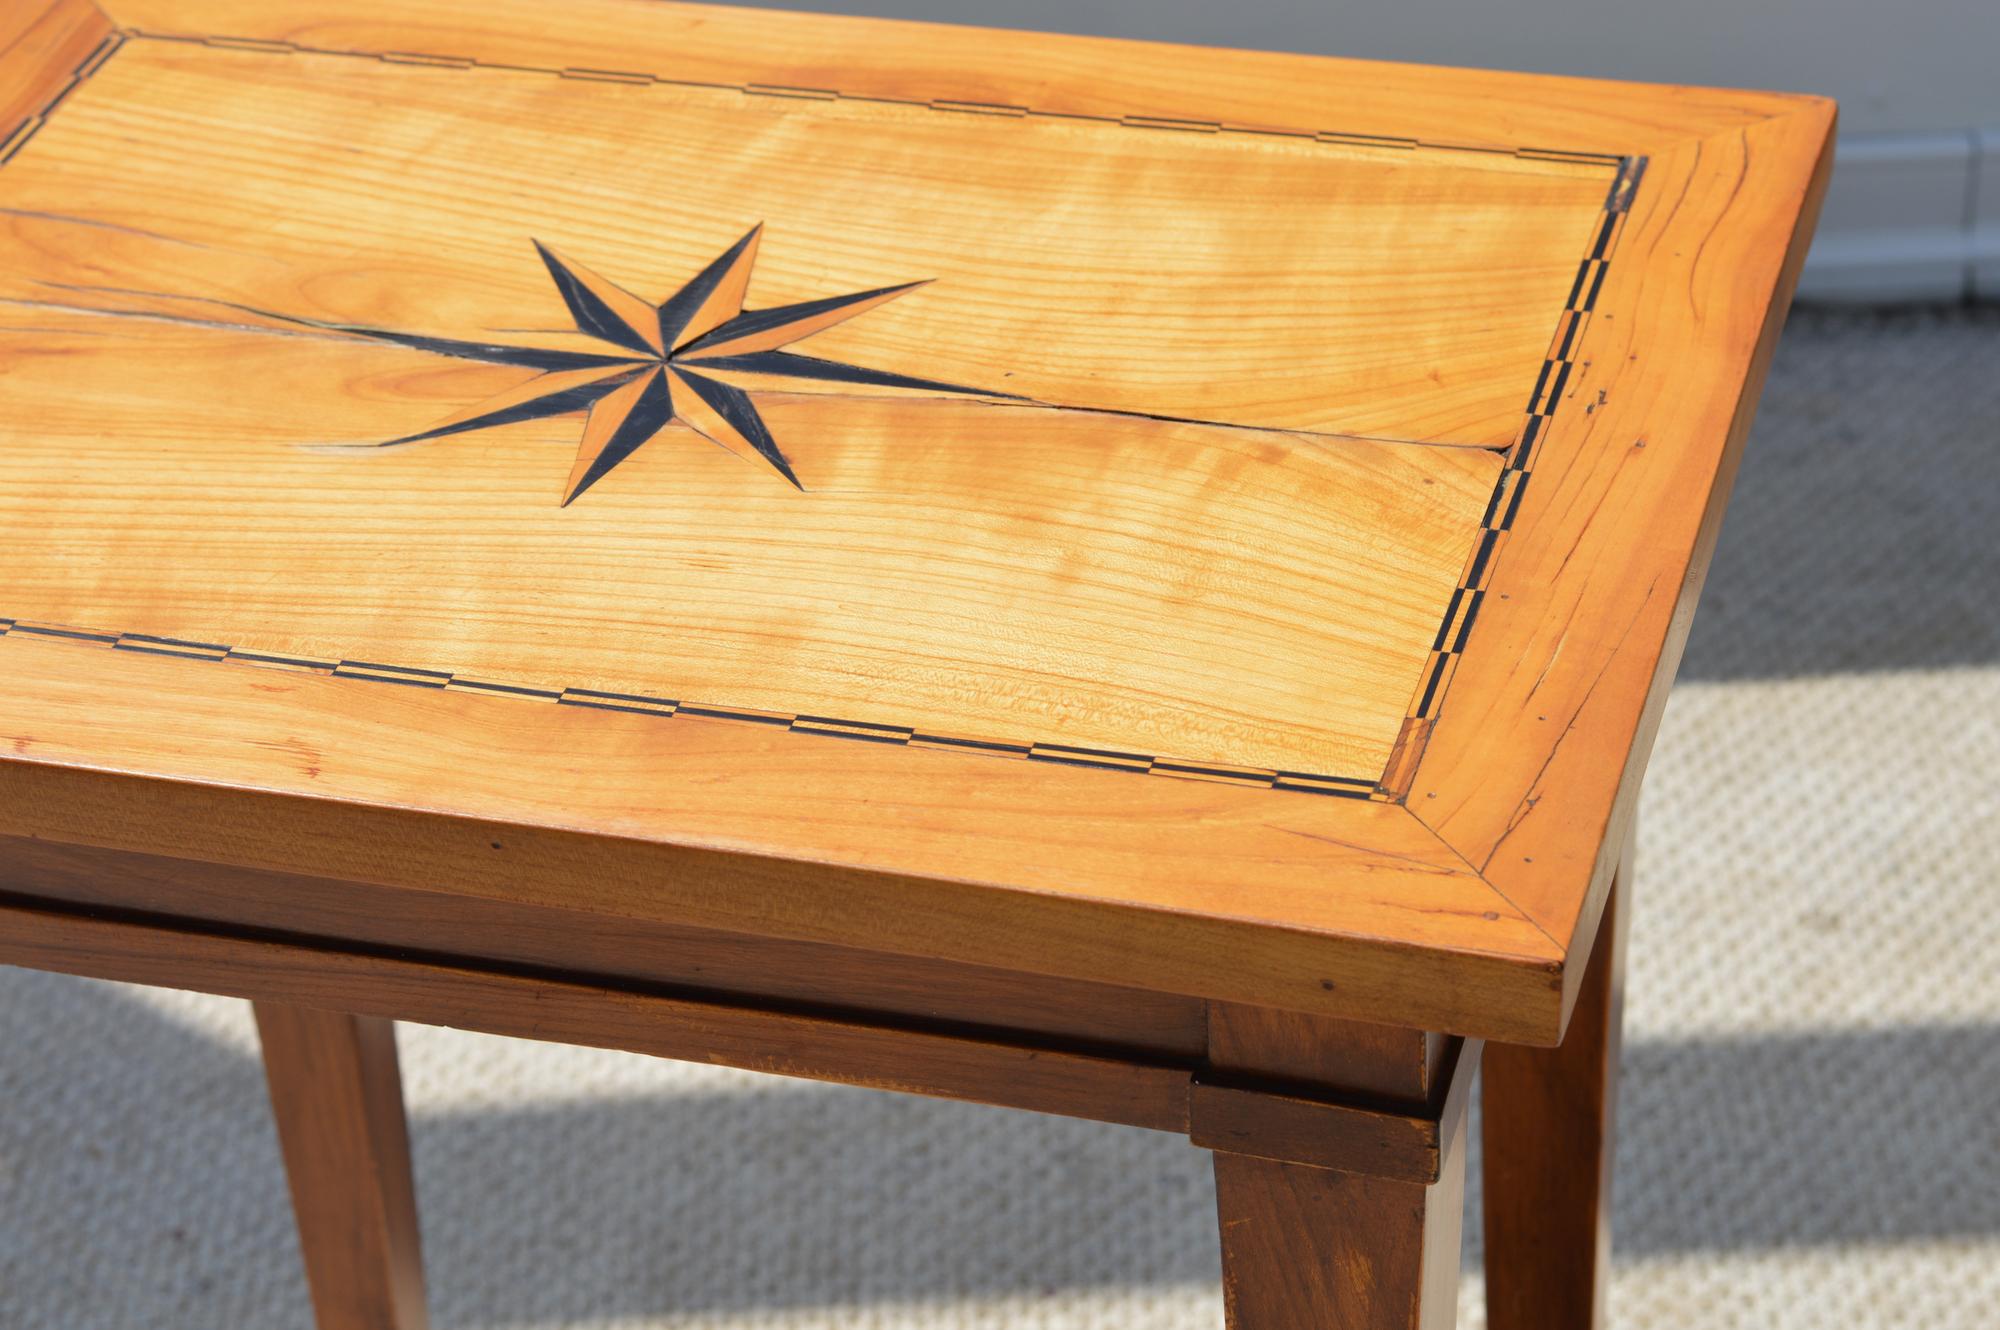 Carved Biedermeier Side Table with North Star Inlay